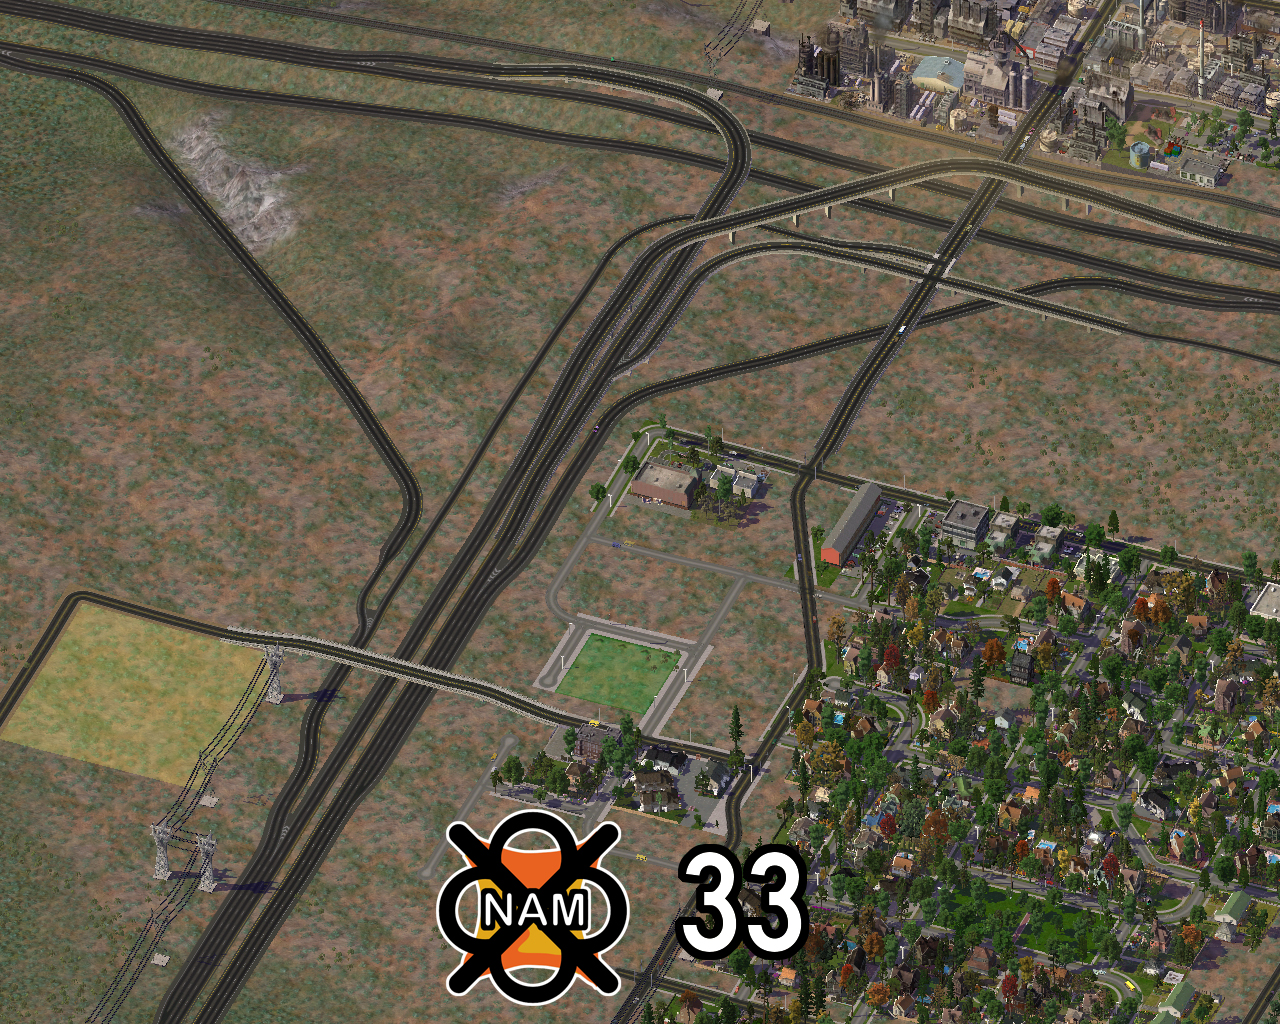 Network Addon Mod Version 33 Released For Simcity 4 News Mod Db